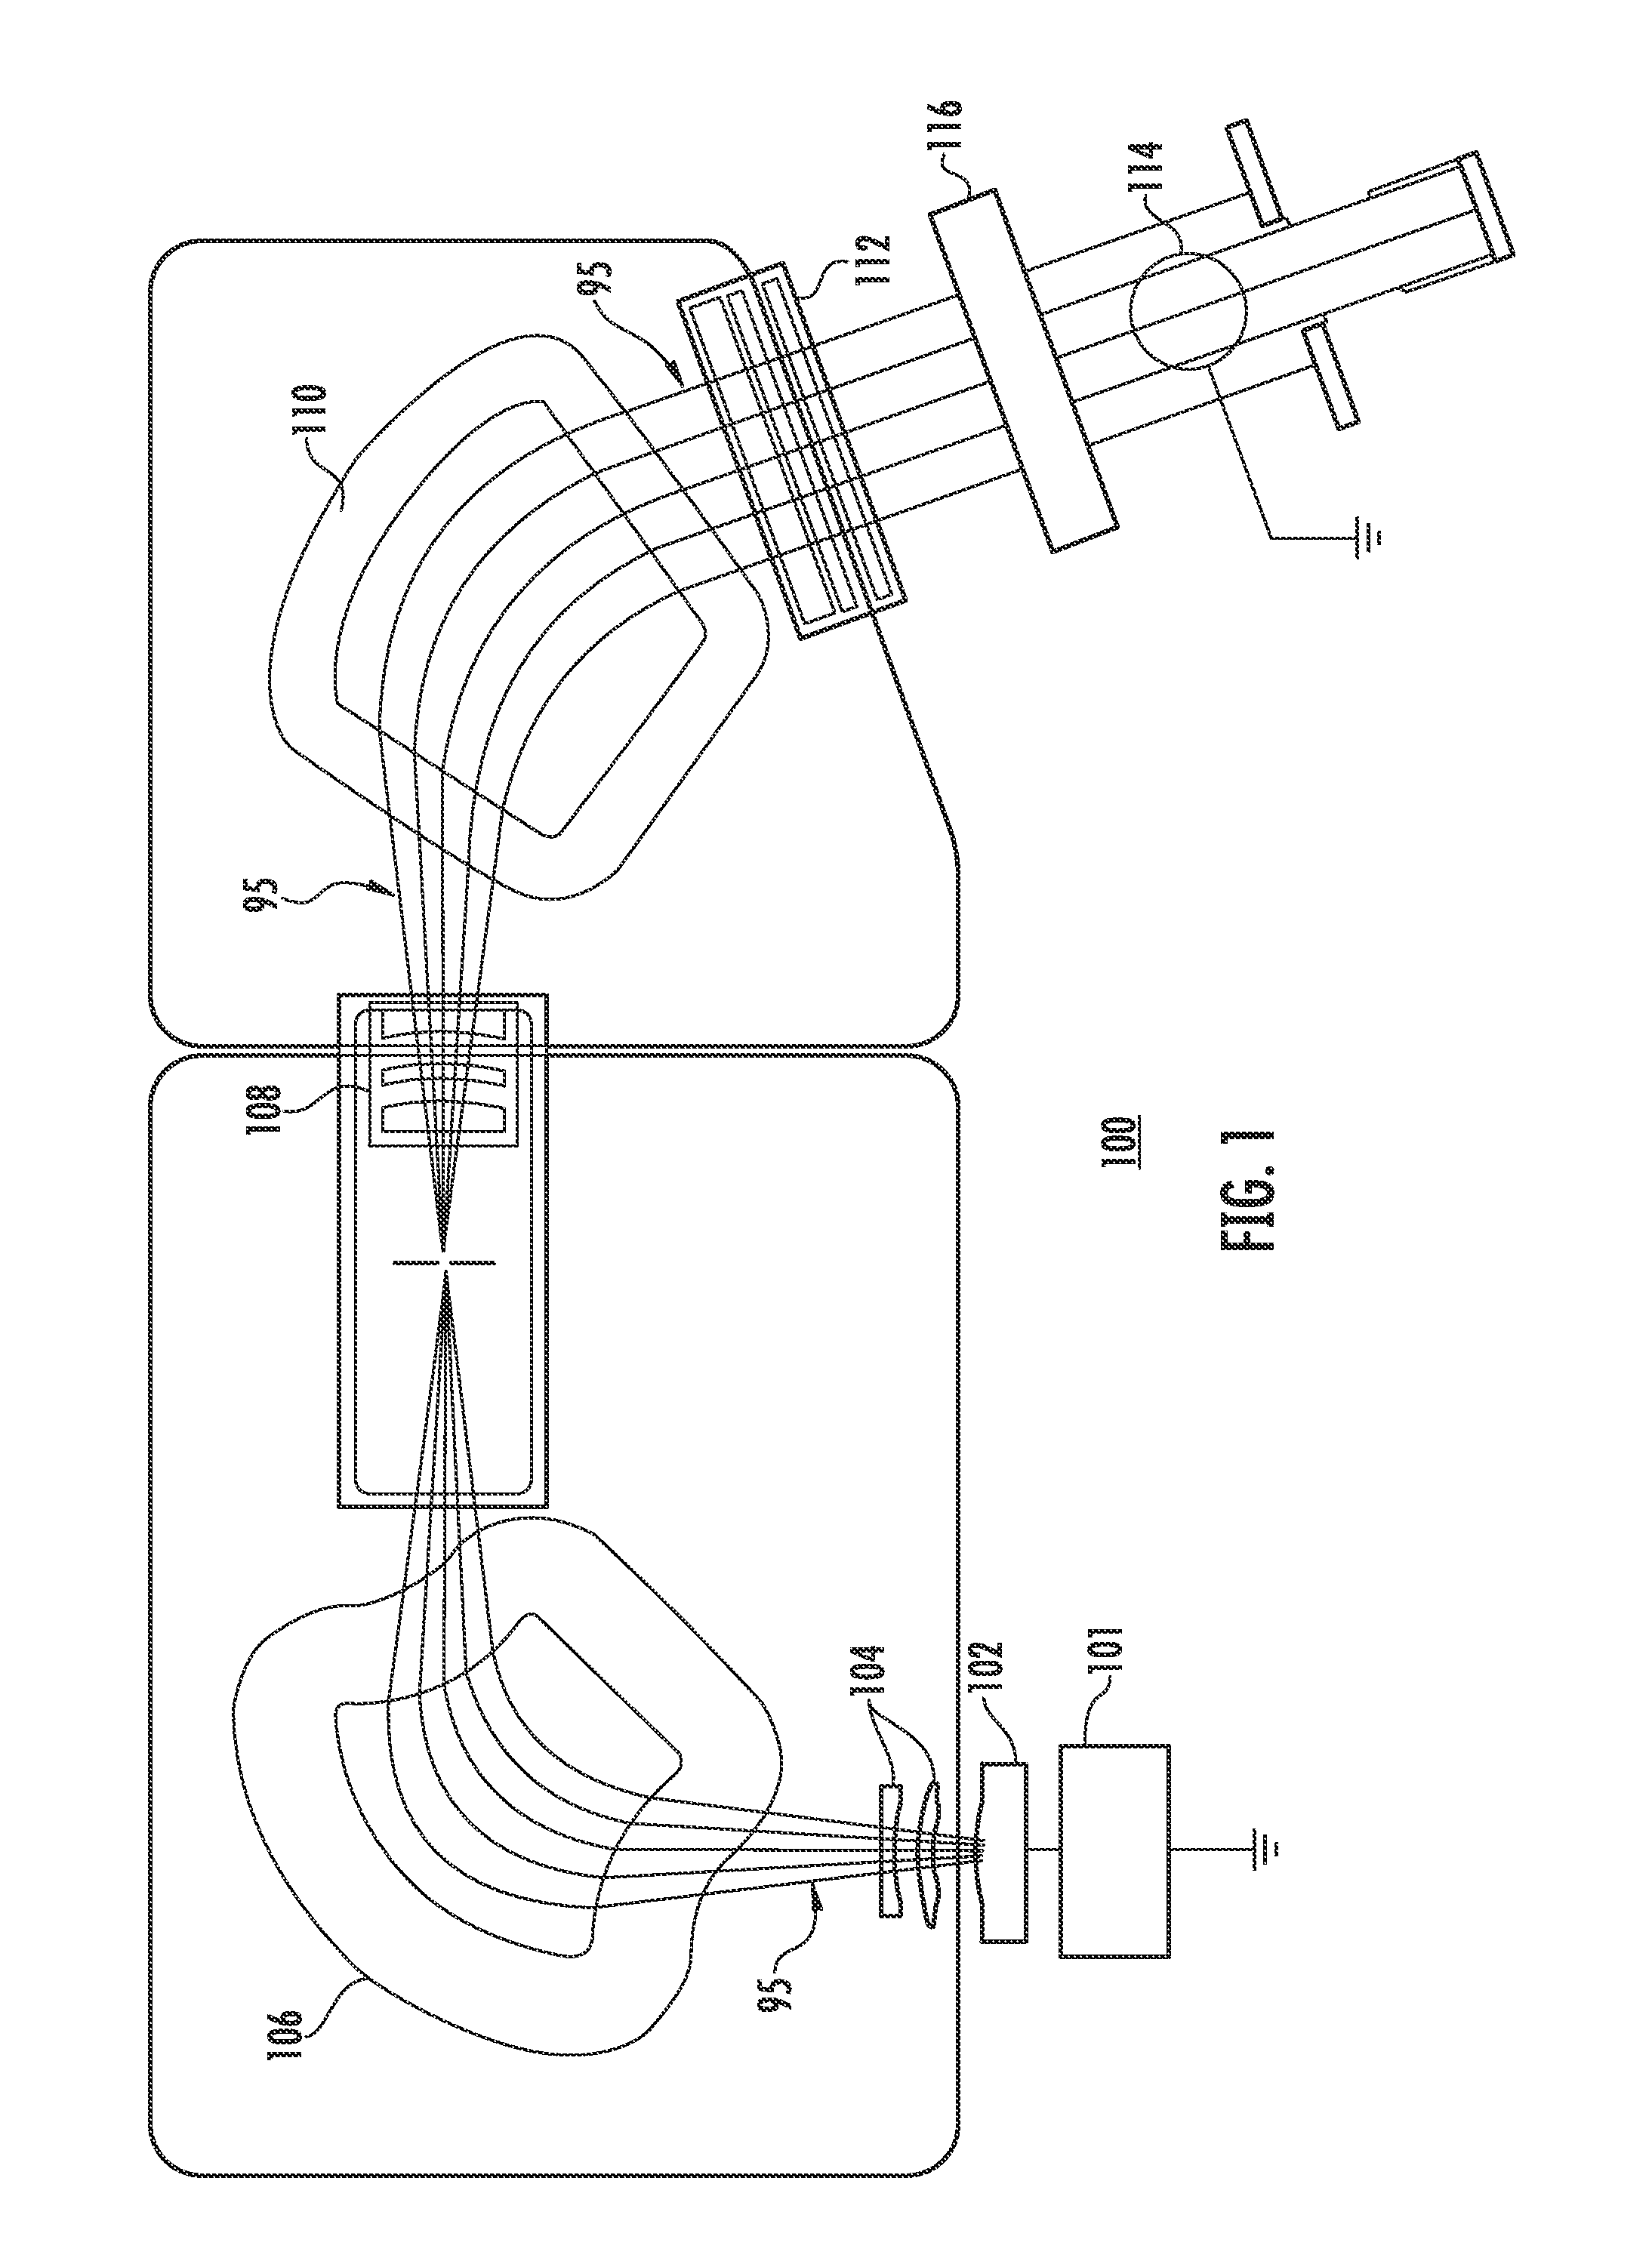 Inductively coupled plasma flood gun using an immersed low inductance fr coil and multicusp magnetic arrangement